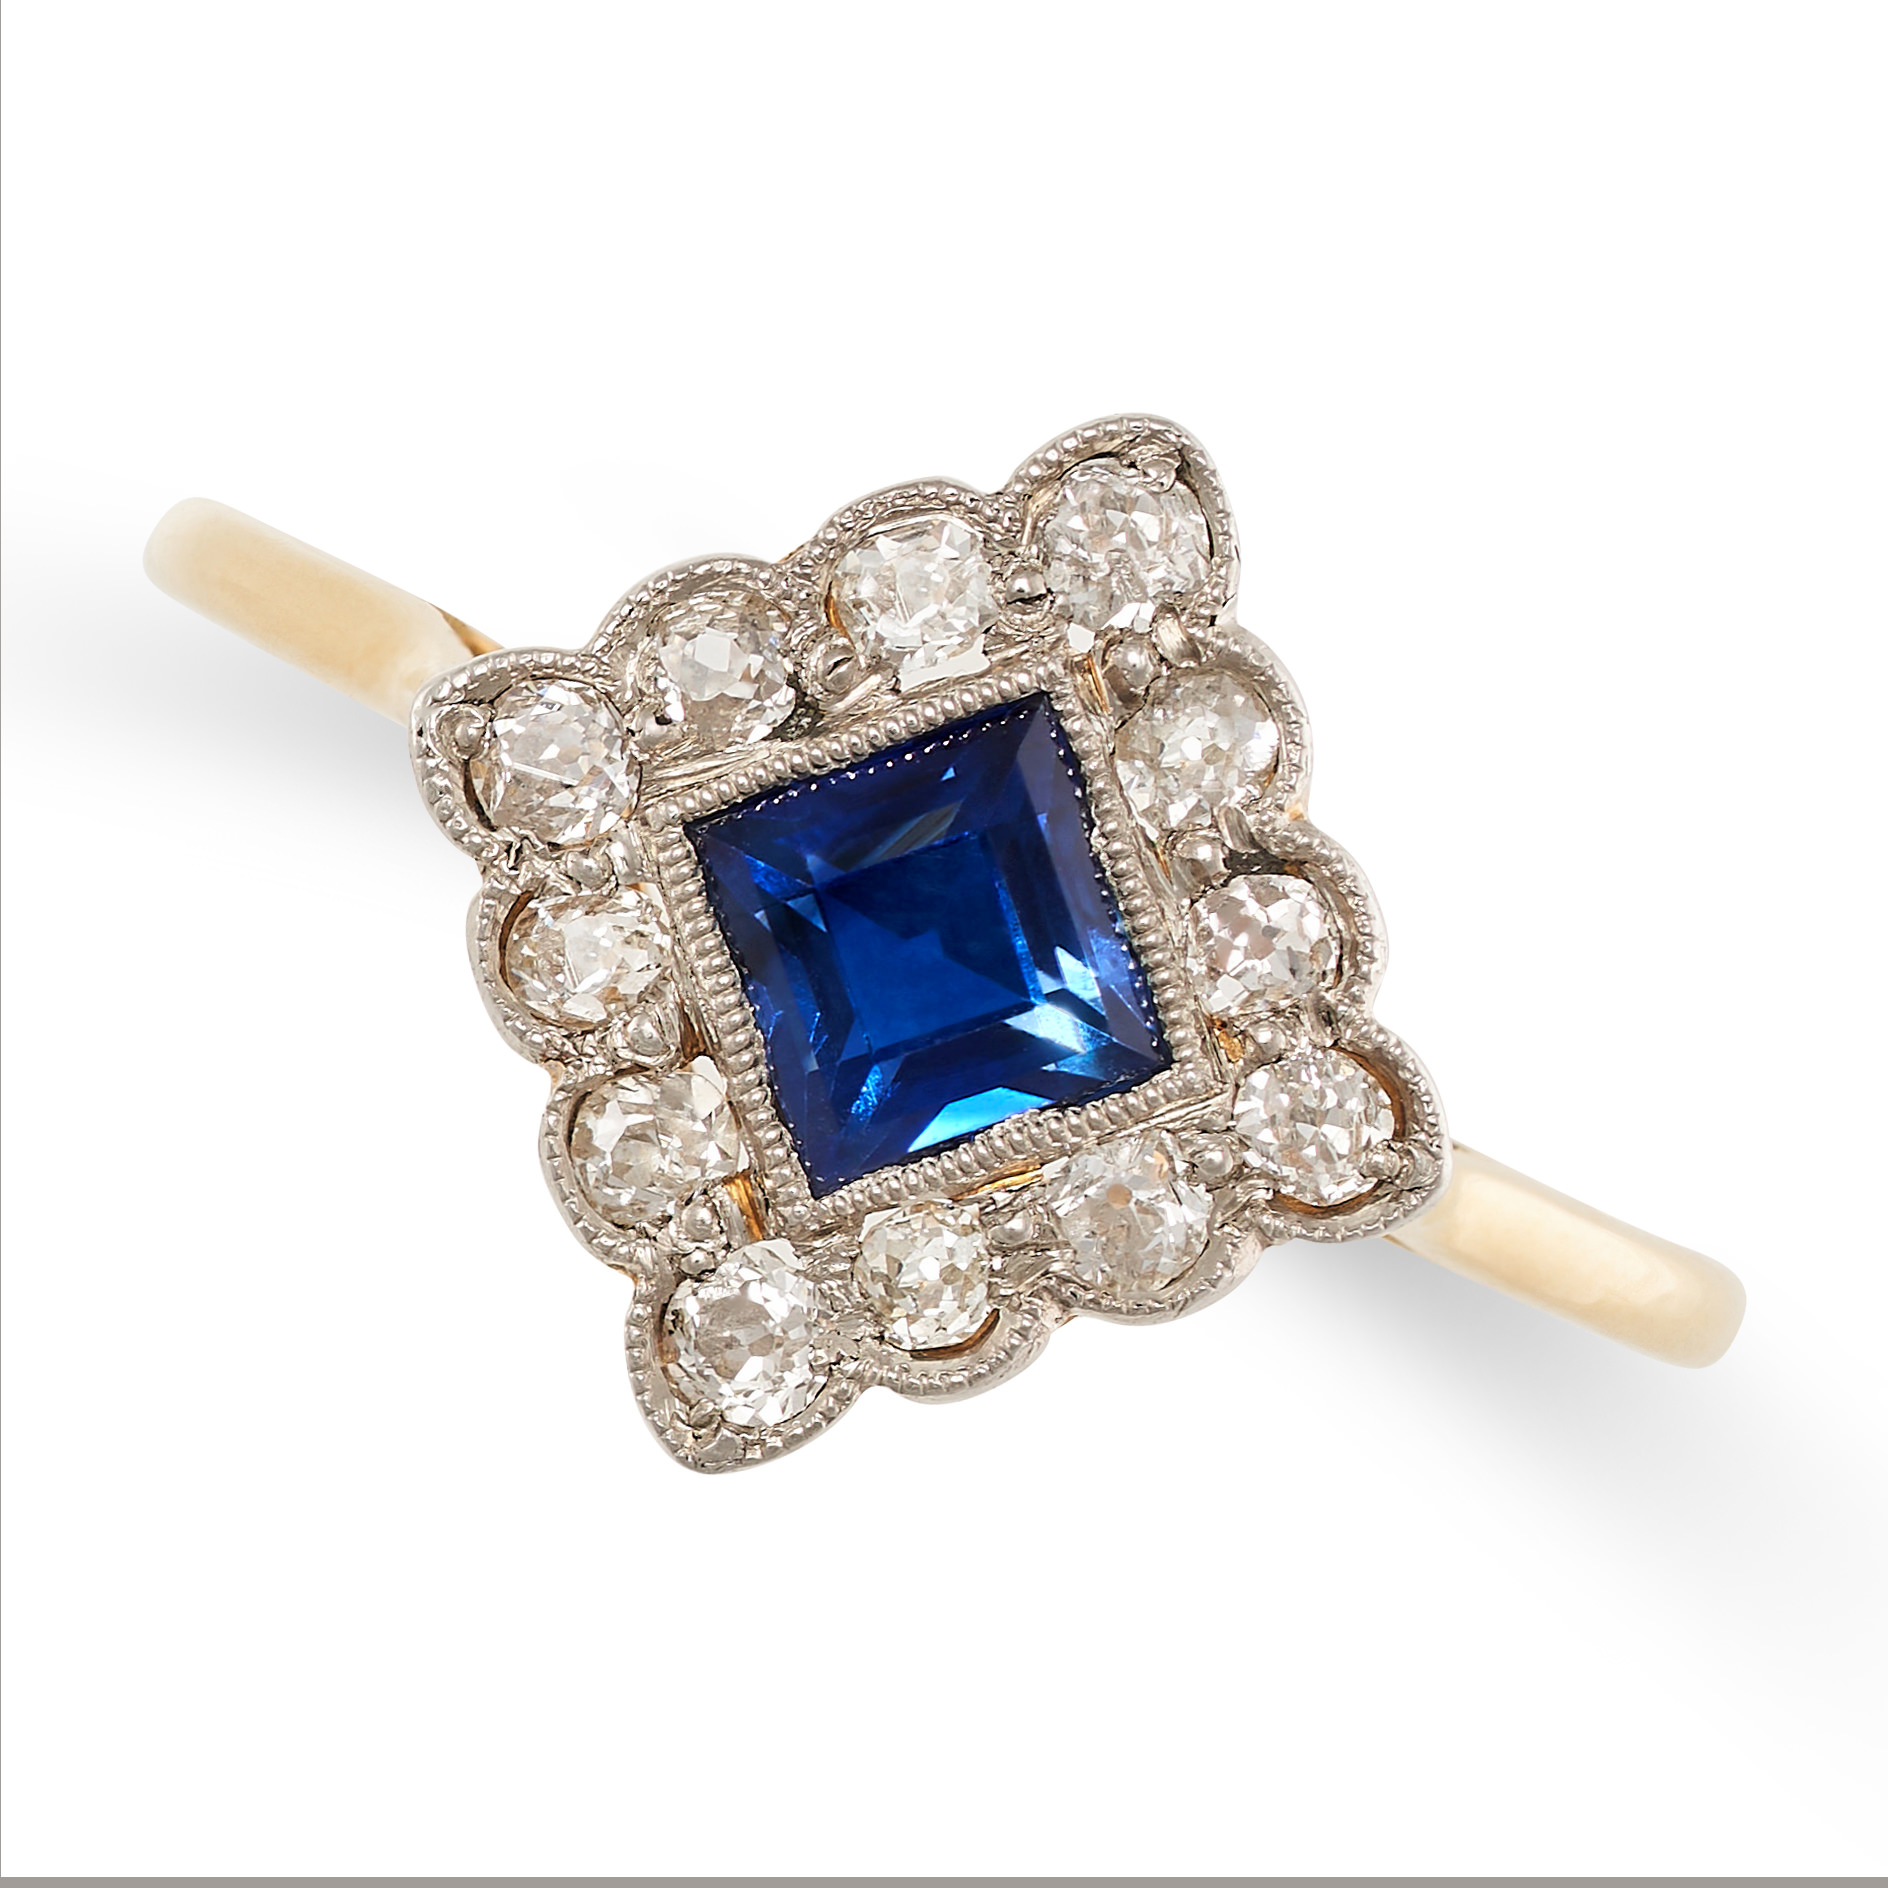 AN ART DECO SAPPHIRE AND DIAMOND RING in 18ct yellow and white gold, set with a square step cut